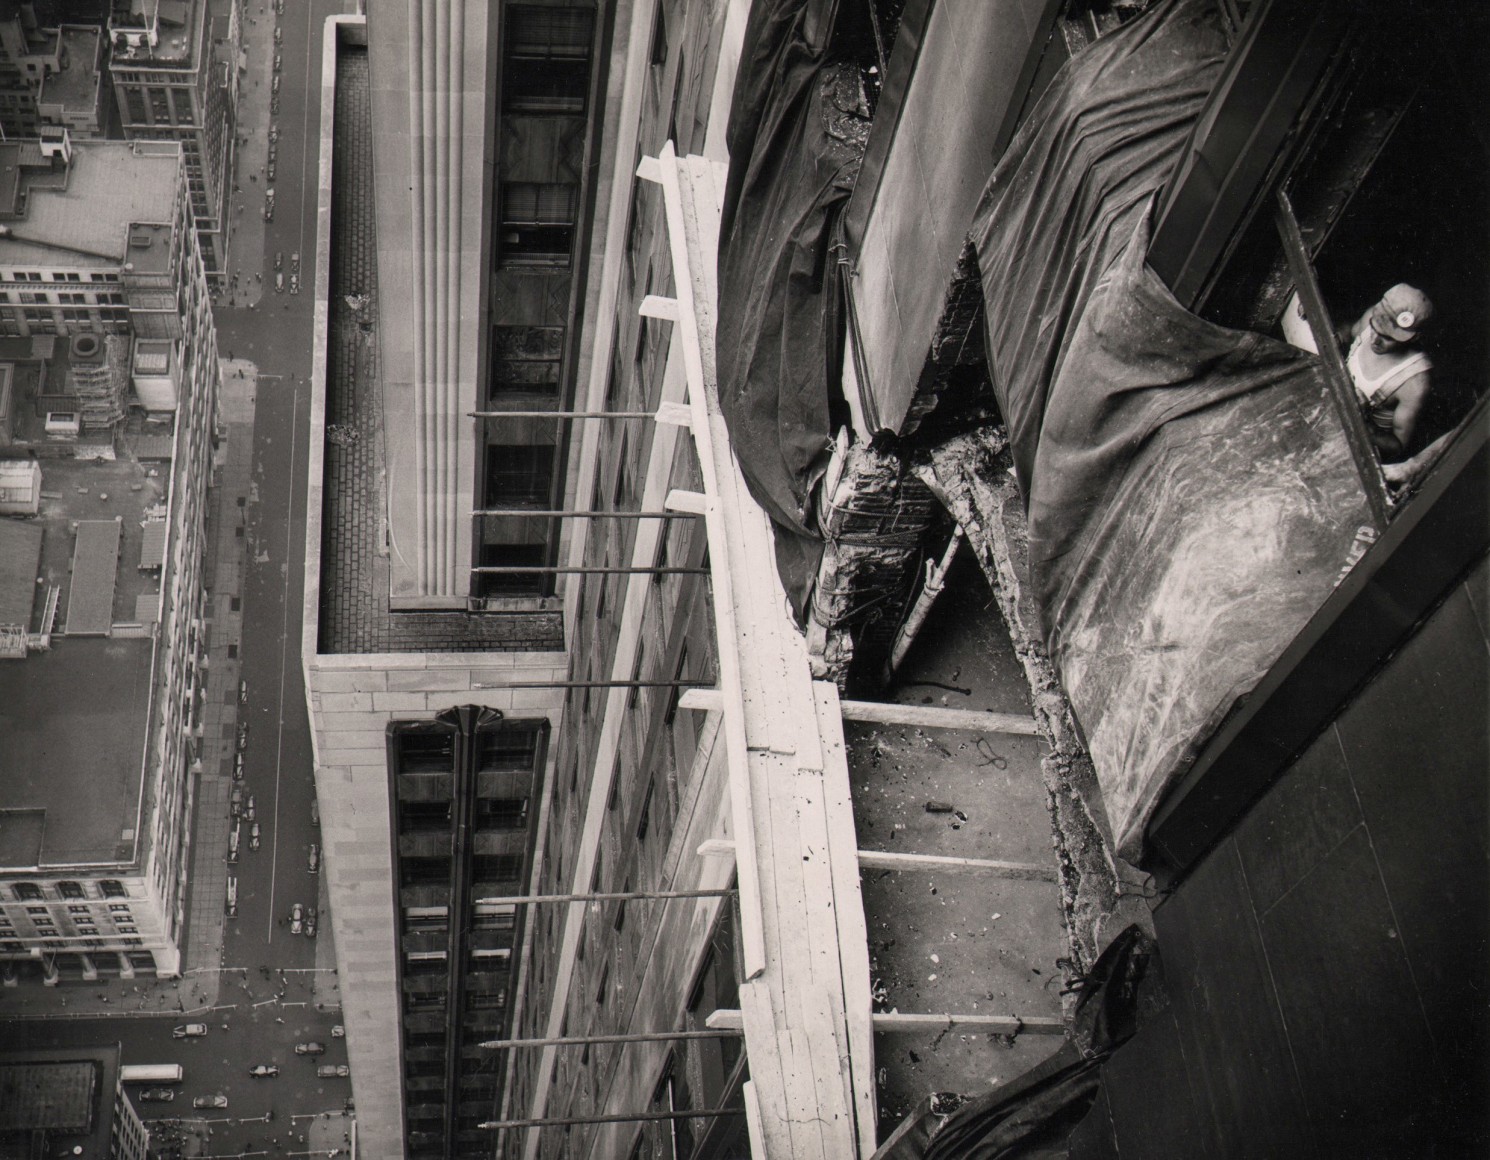 04. Anonymous, Beginning Repairs on Empire State, ​1945. Above view of mid-repair building facade with rebar, tarp, and wood planks visible. A construction worker can be seen on the far right.